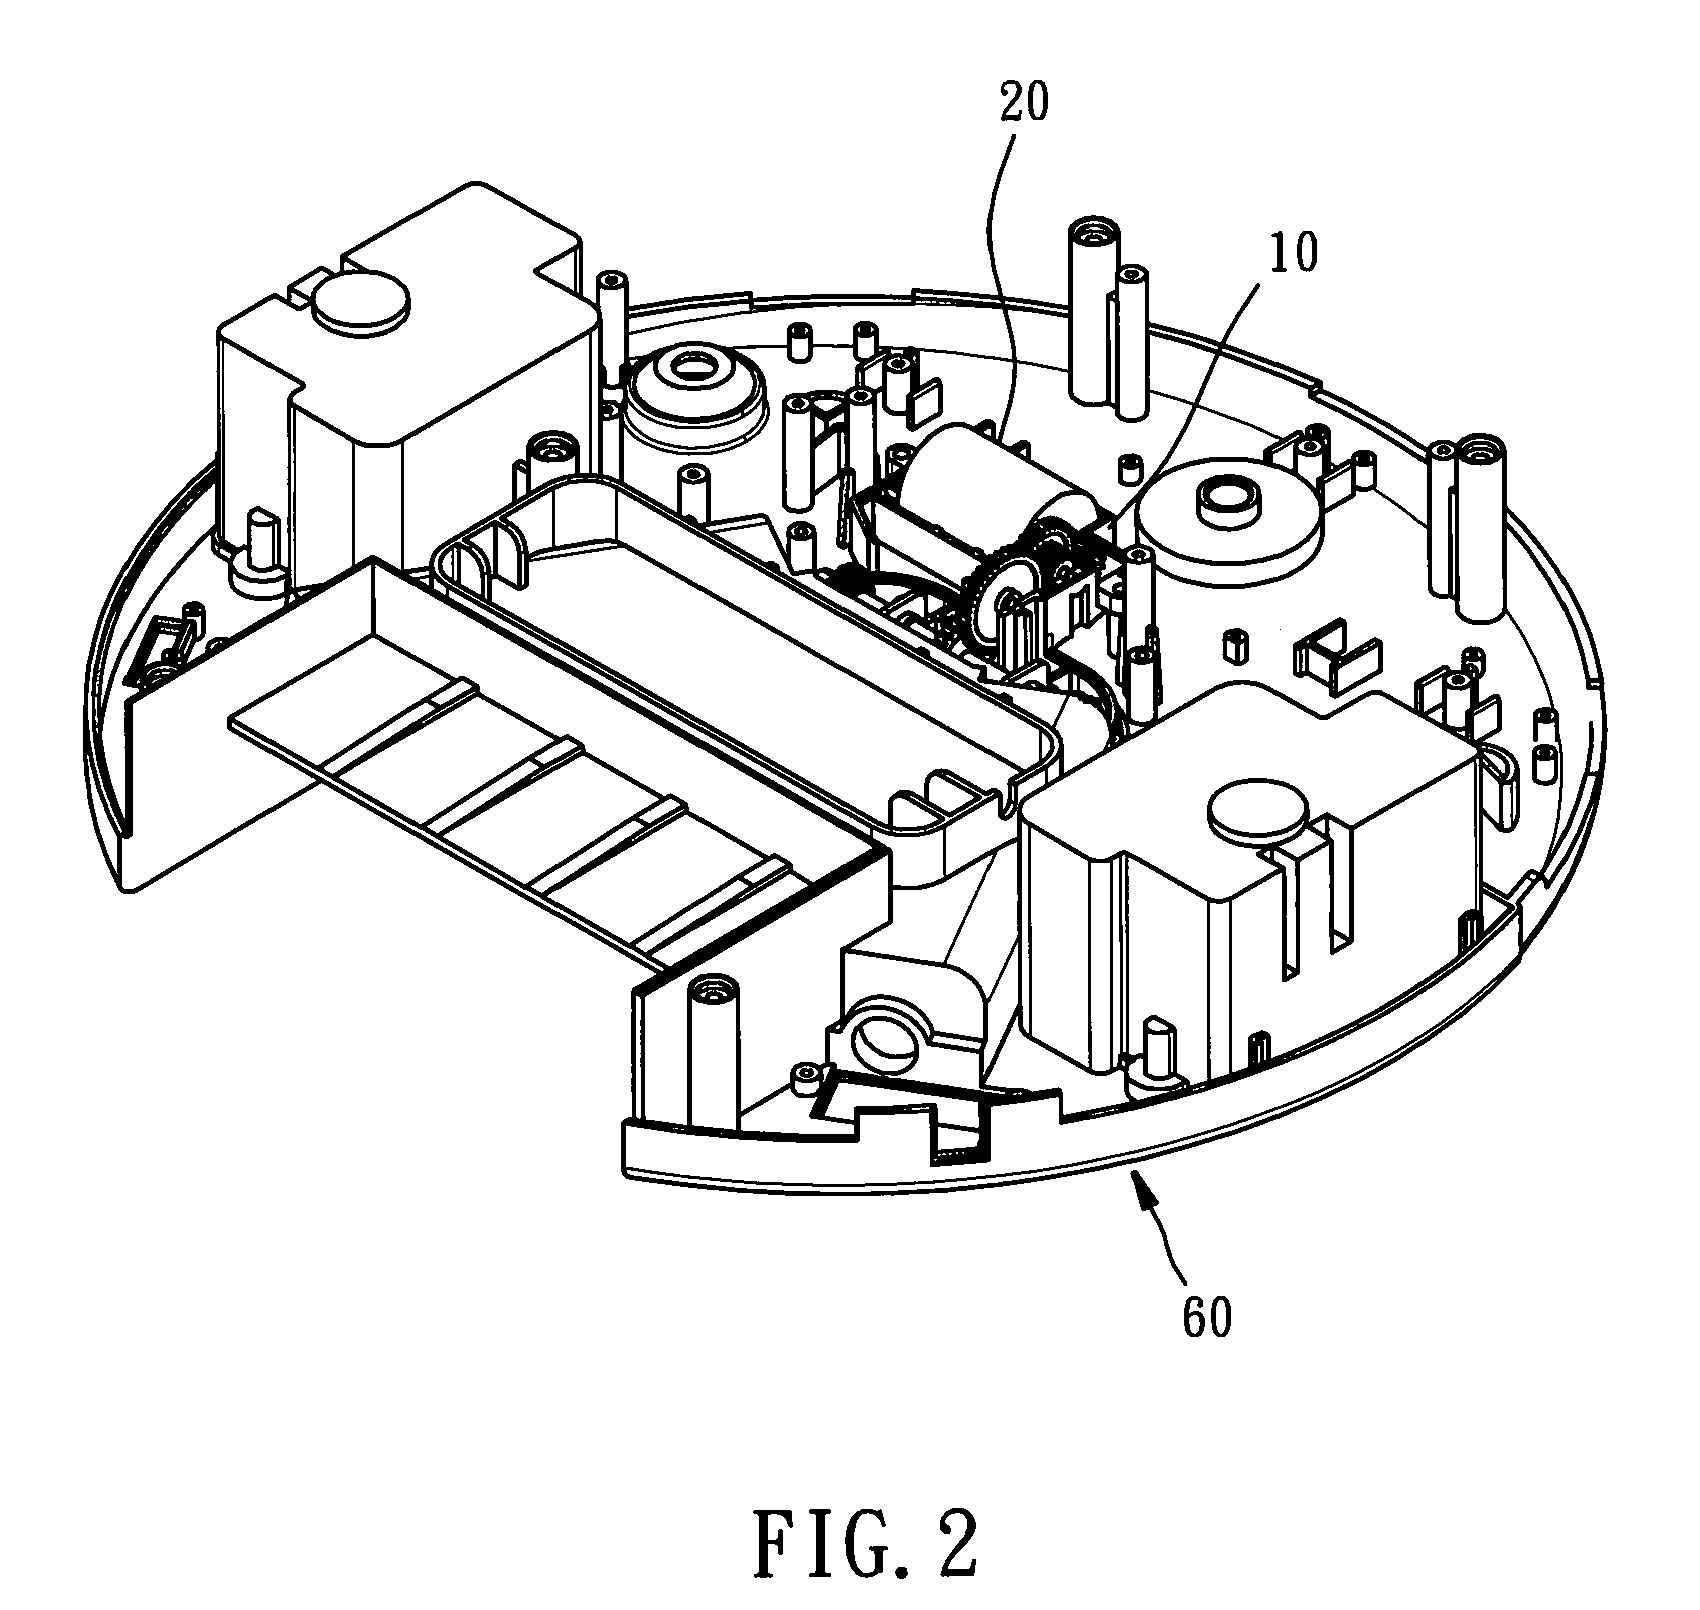 Mobile robotic vacuum cleaner with a detachable electrical fan